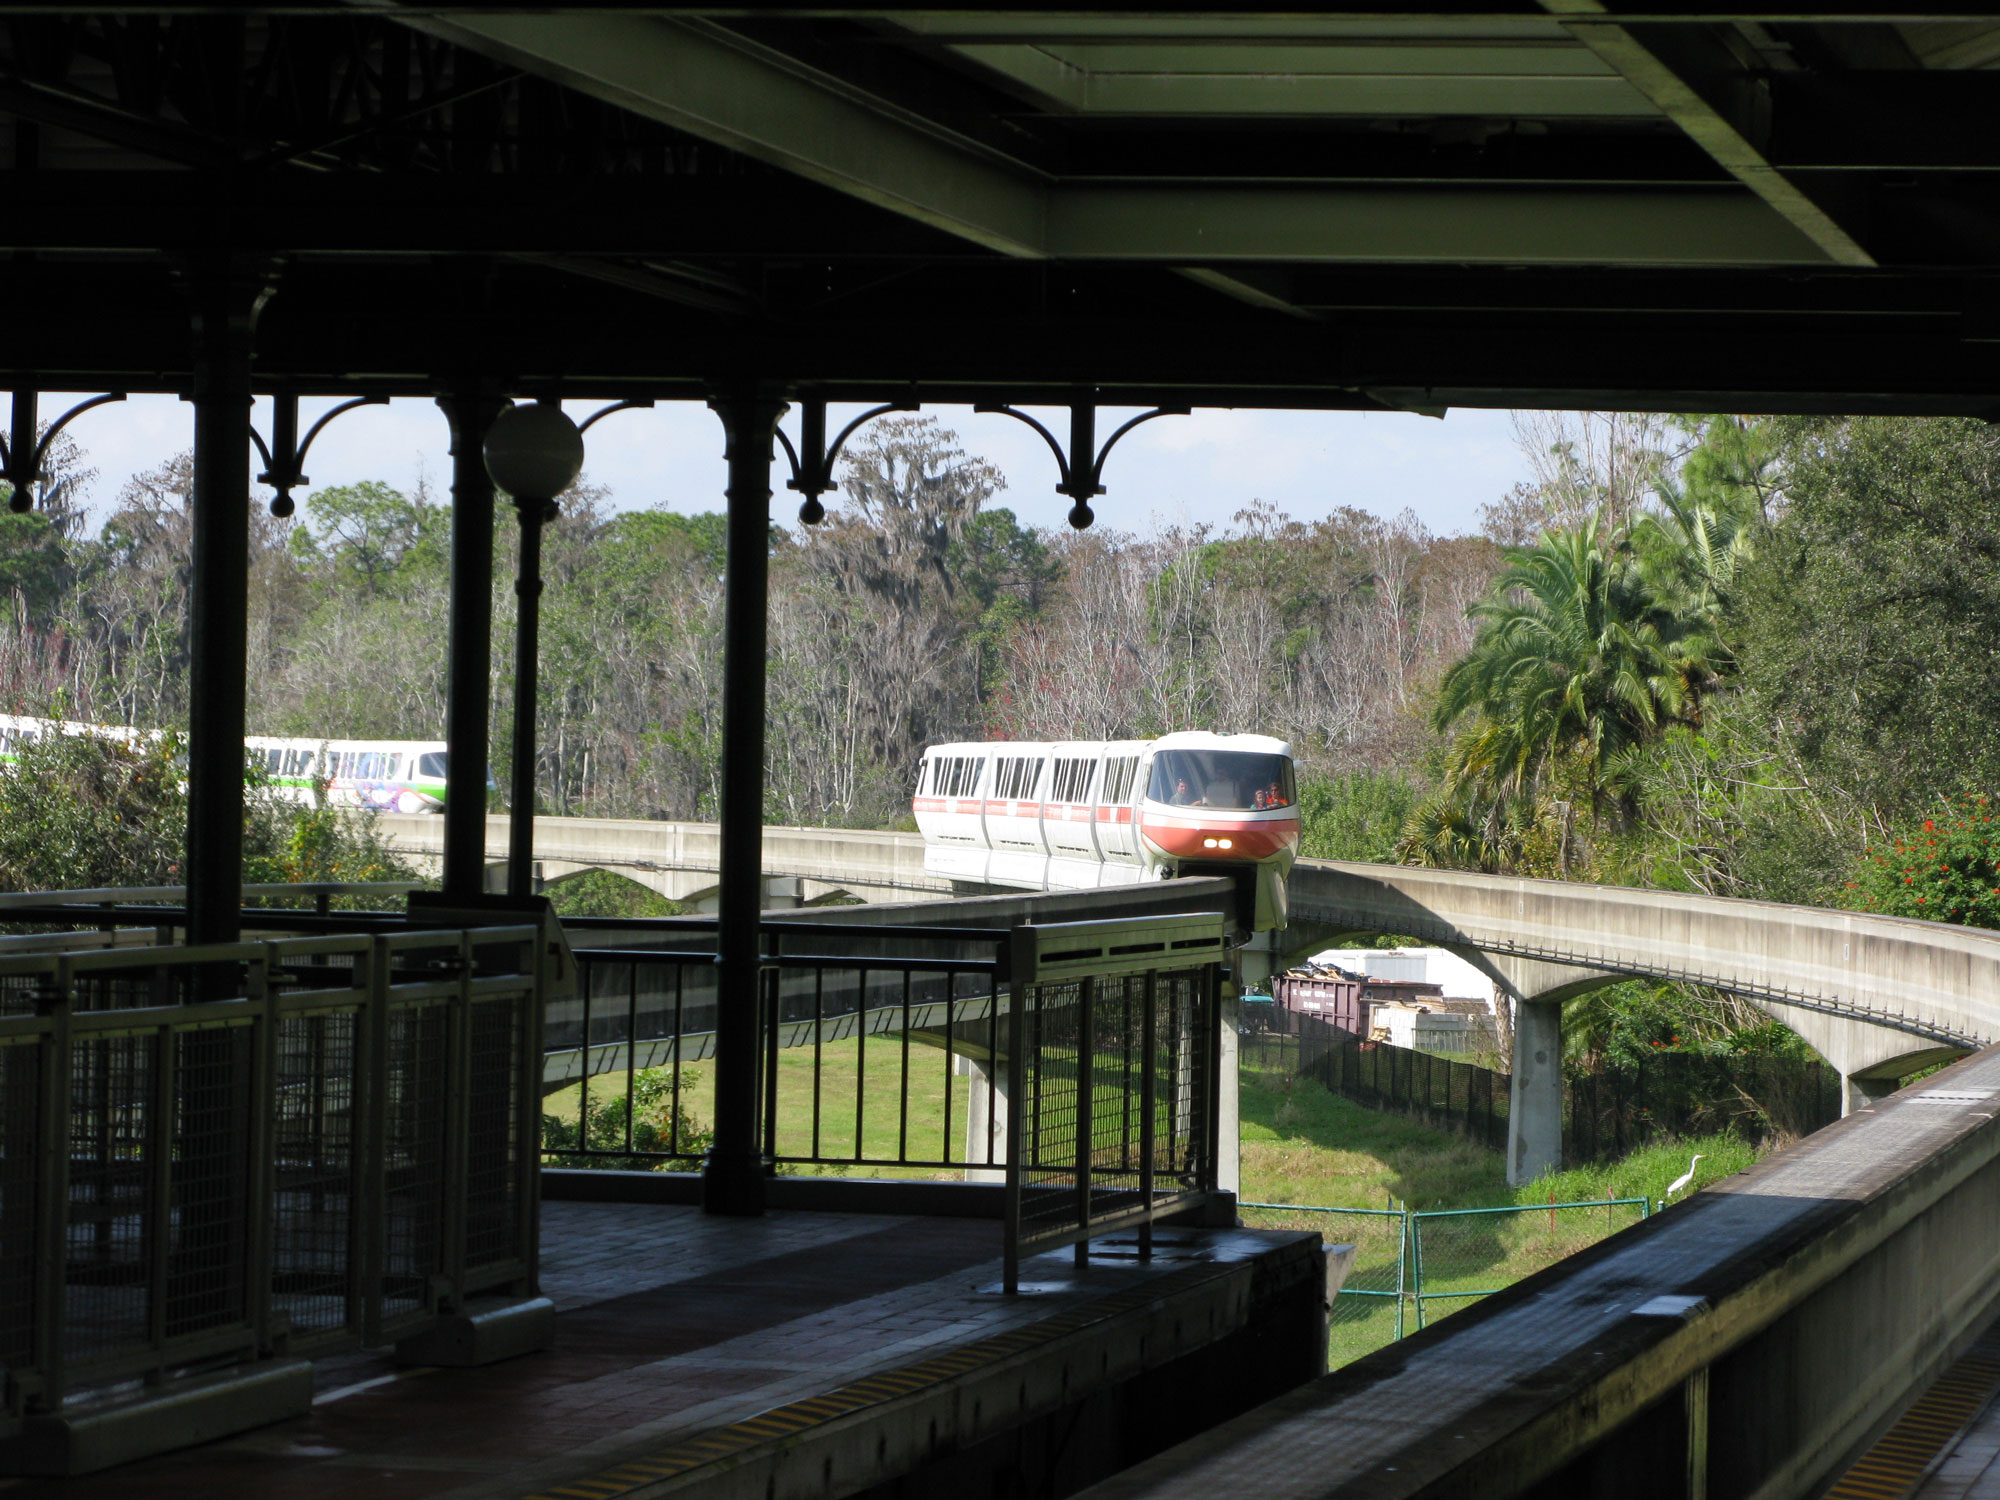 Coral monorail arrival